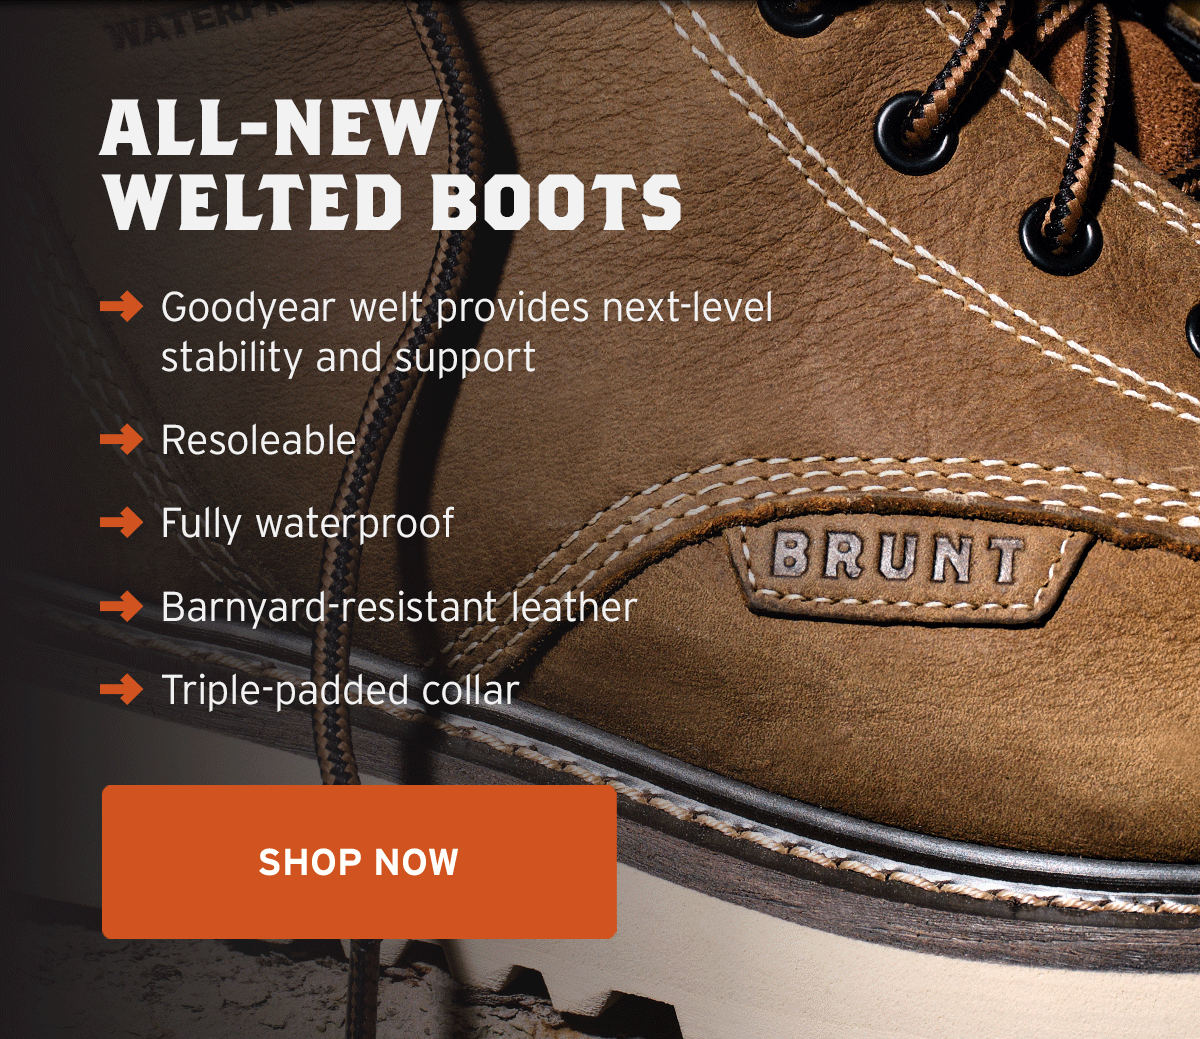 All-New Welted Boots